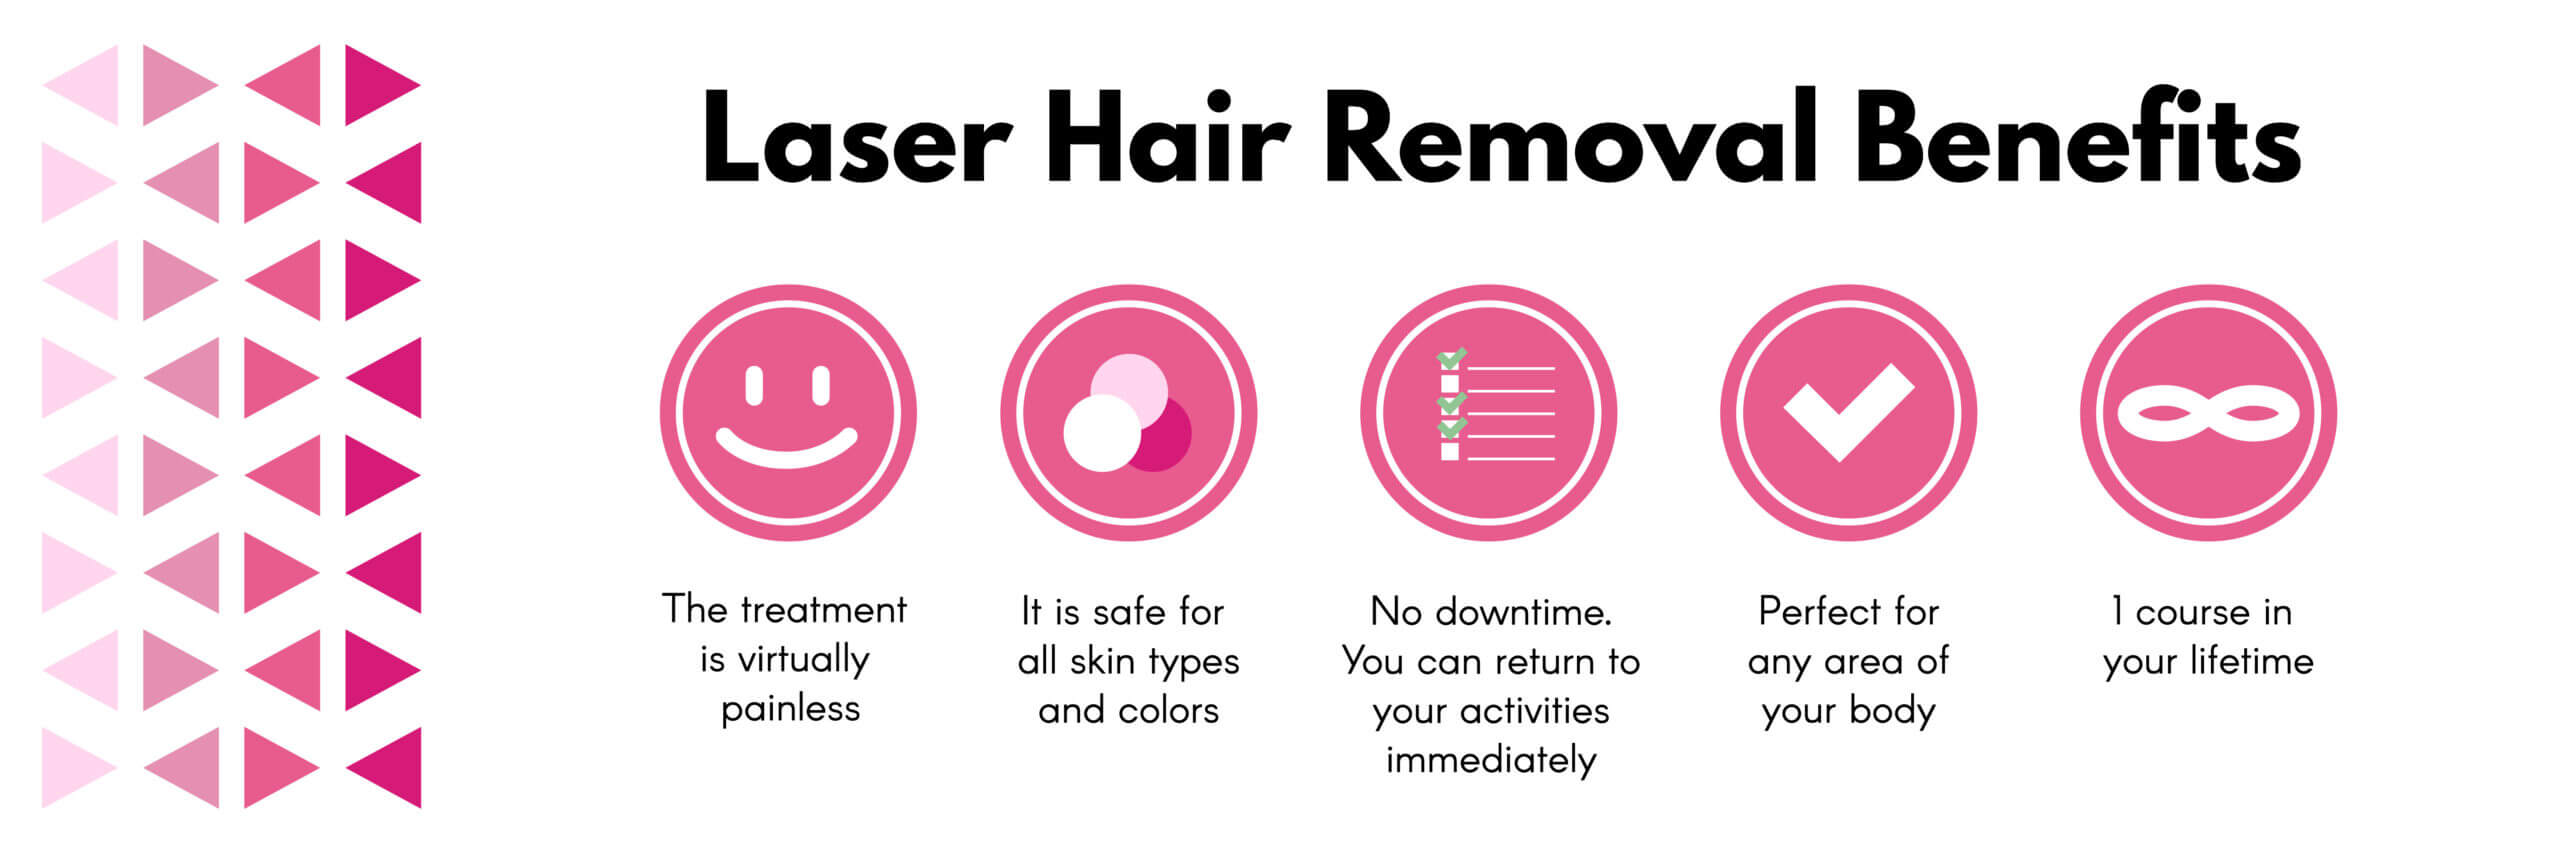 Laser Hair Removal Benefits